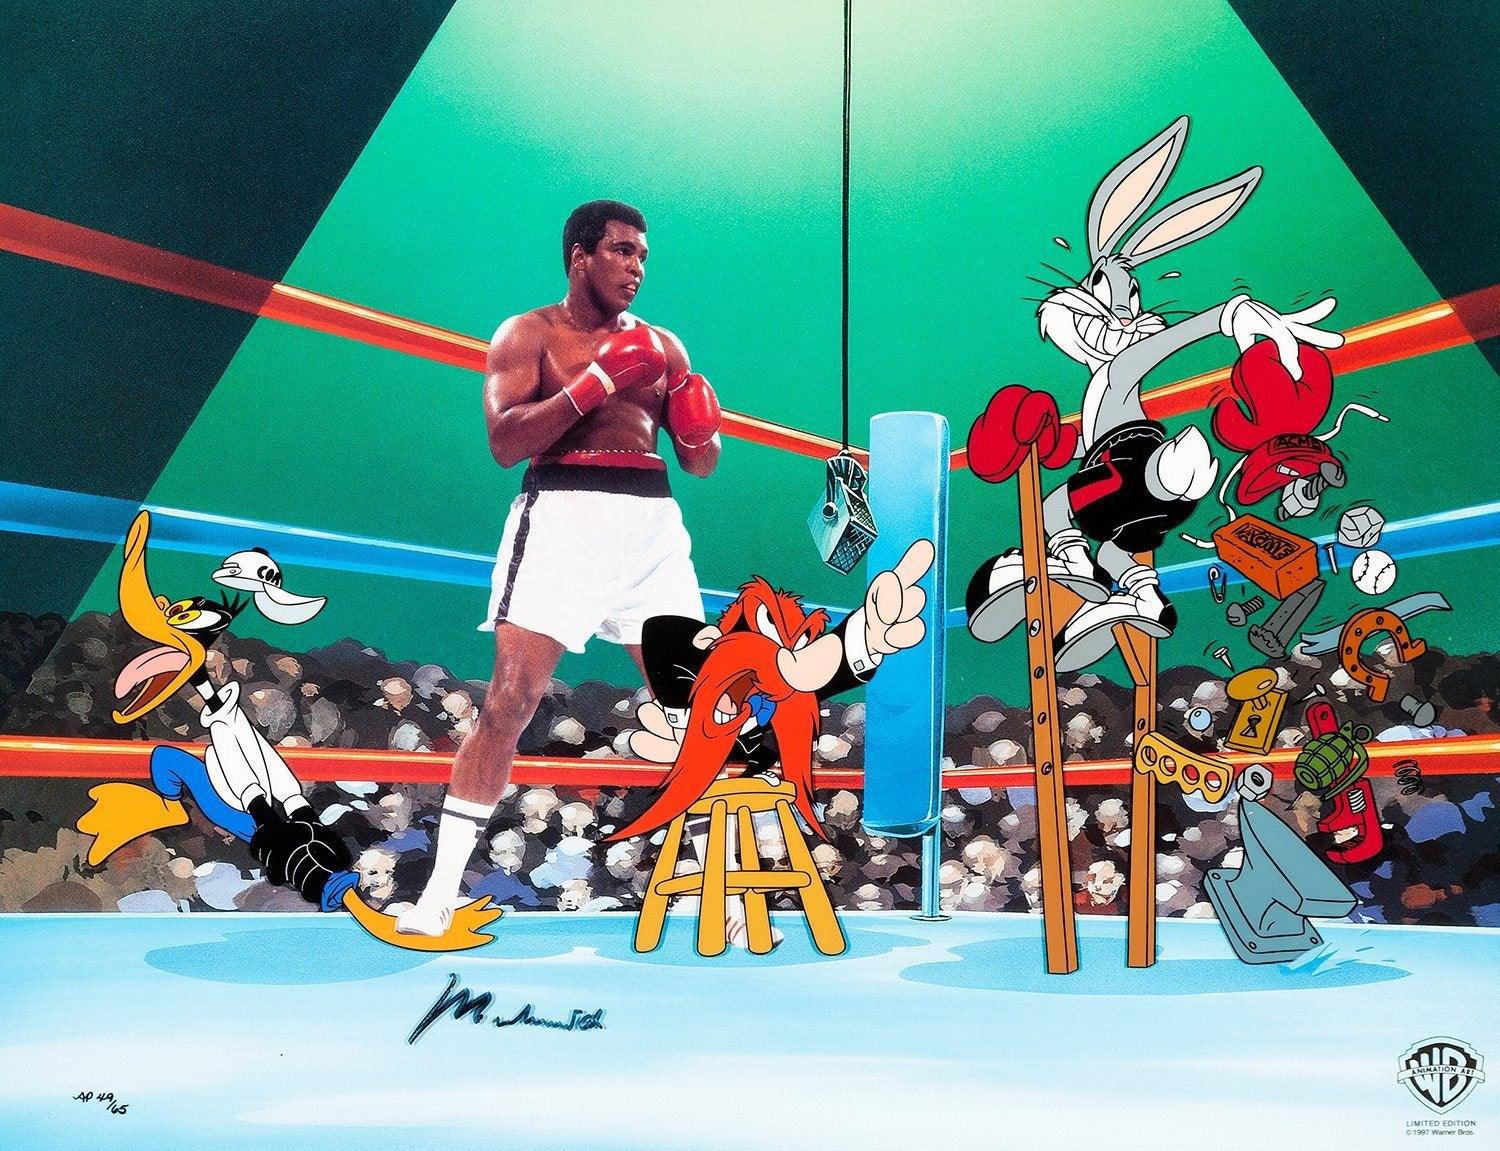 Empty That Glove! Limited Edition Cel signed by Muhammed Ali - Art by Looney Tunes Studio Artists